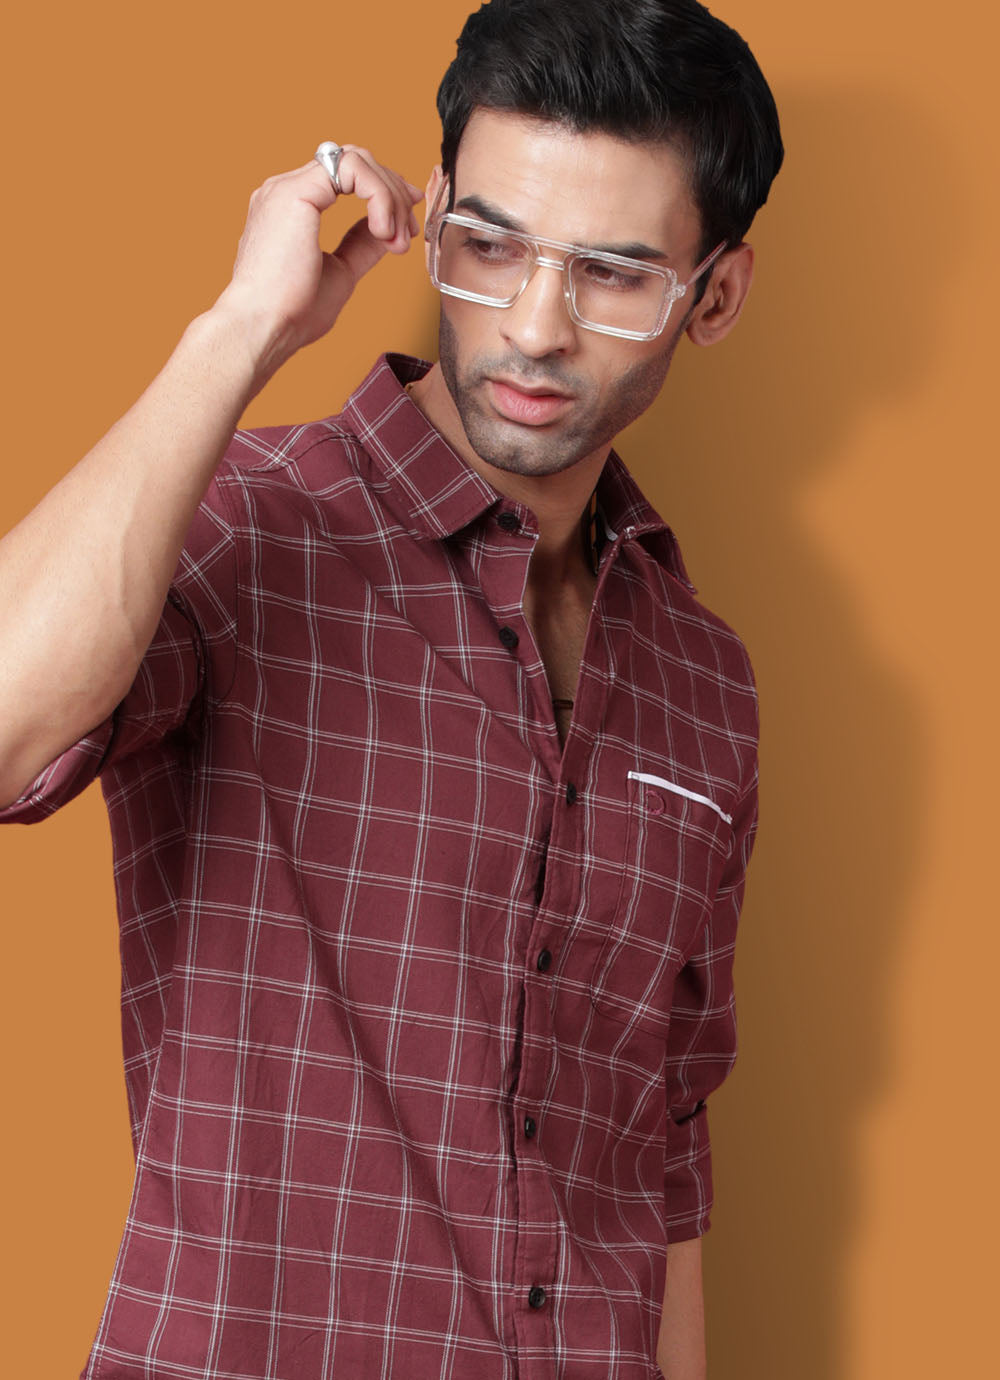 Checkered Cotton Slim Fit Maroon Shirt with Patch Pocket